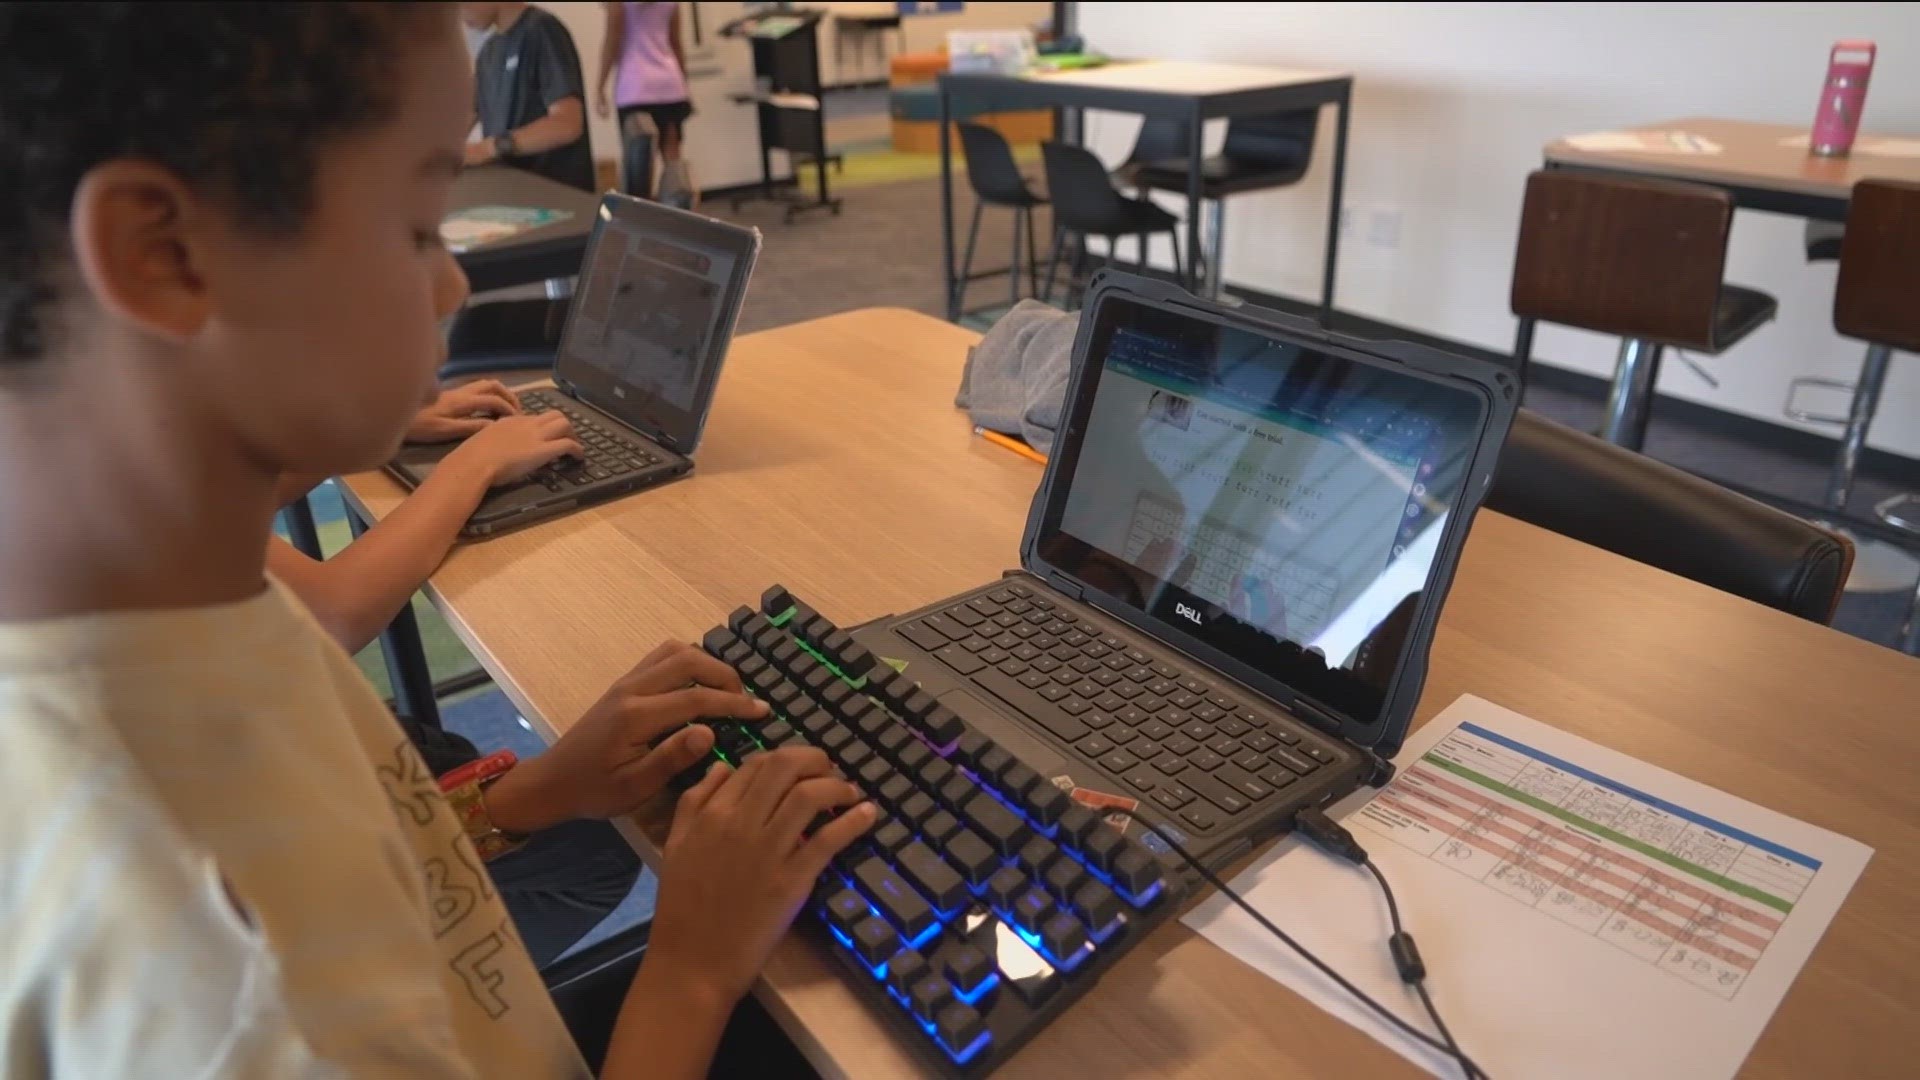 As artificial intelligence becomes more prevalent, some schools are figuring out how to bring it into the classroom. One private school in Austin is embracing it.